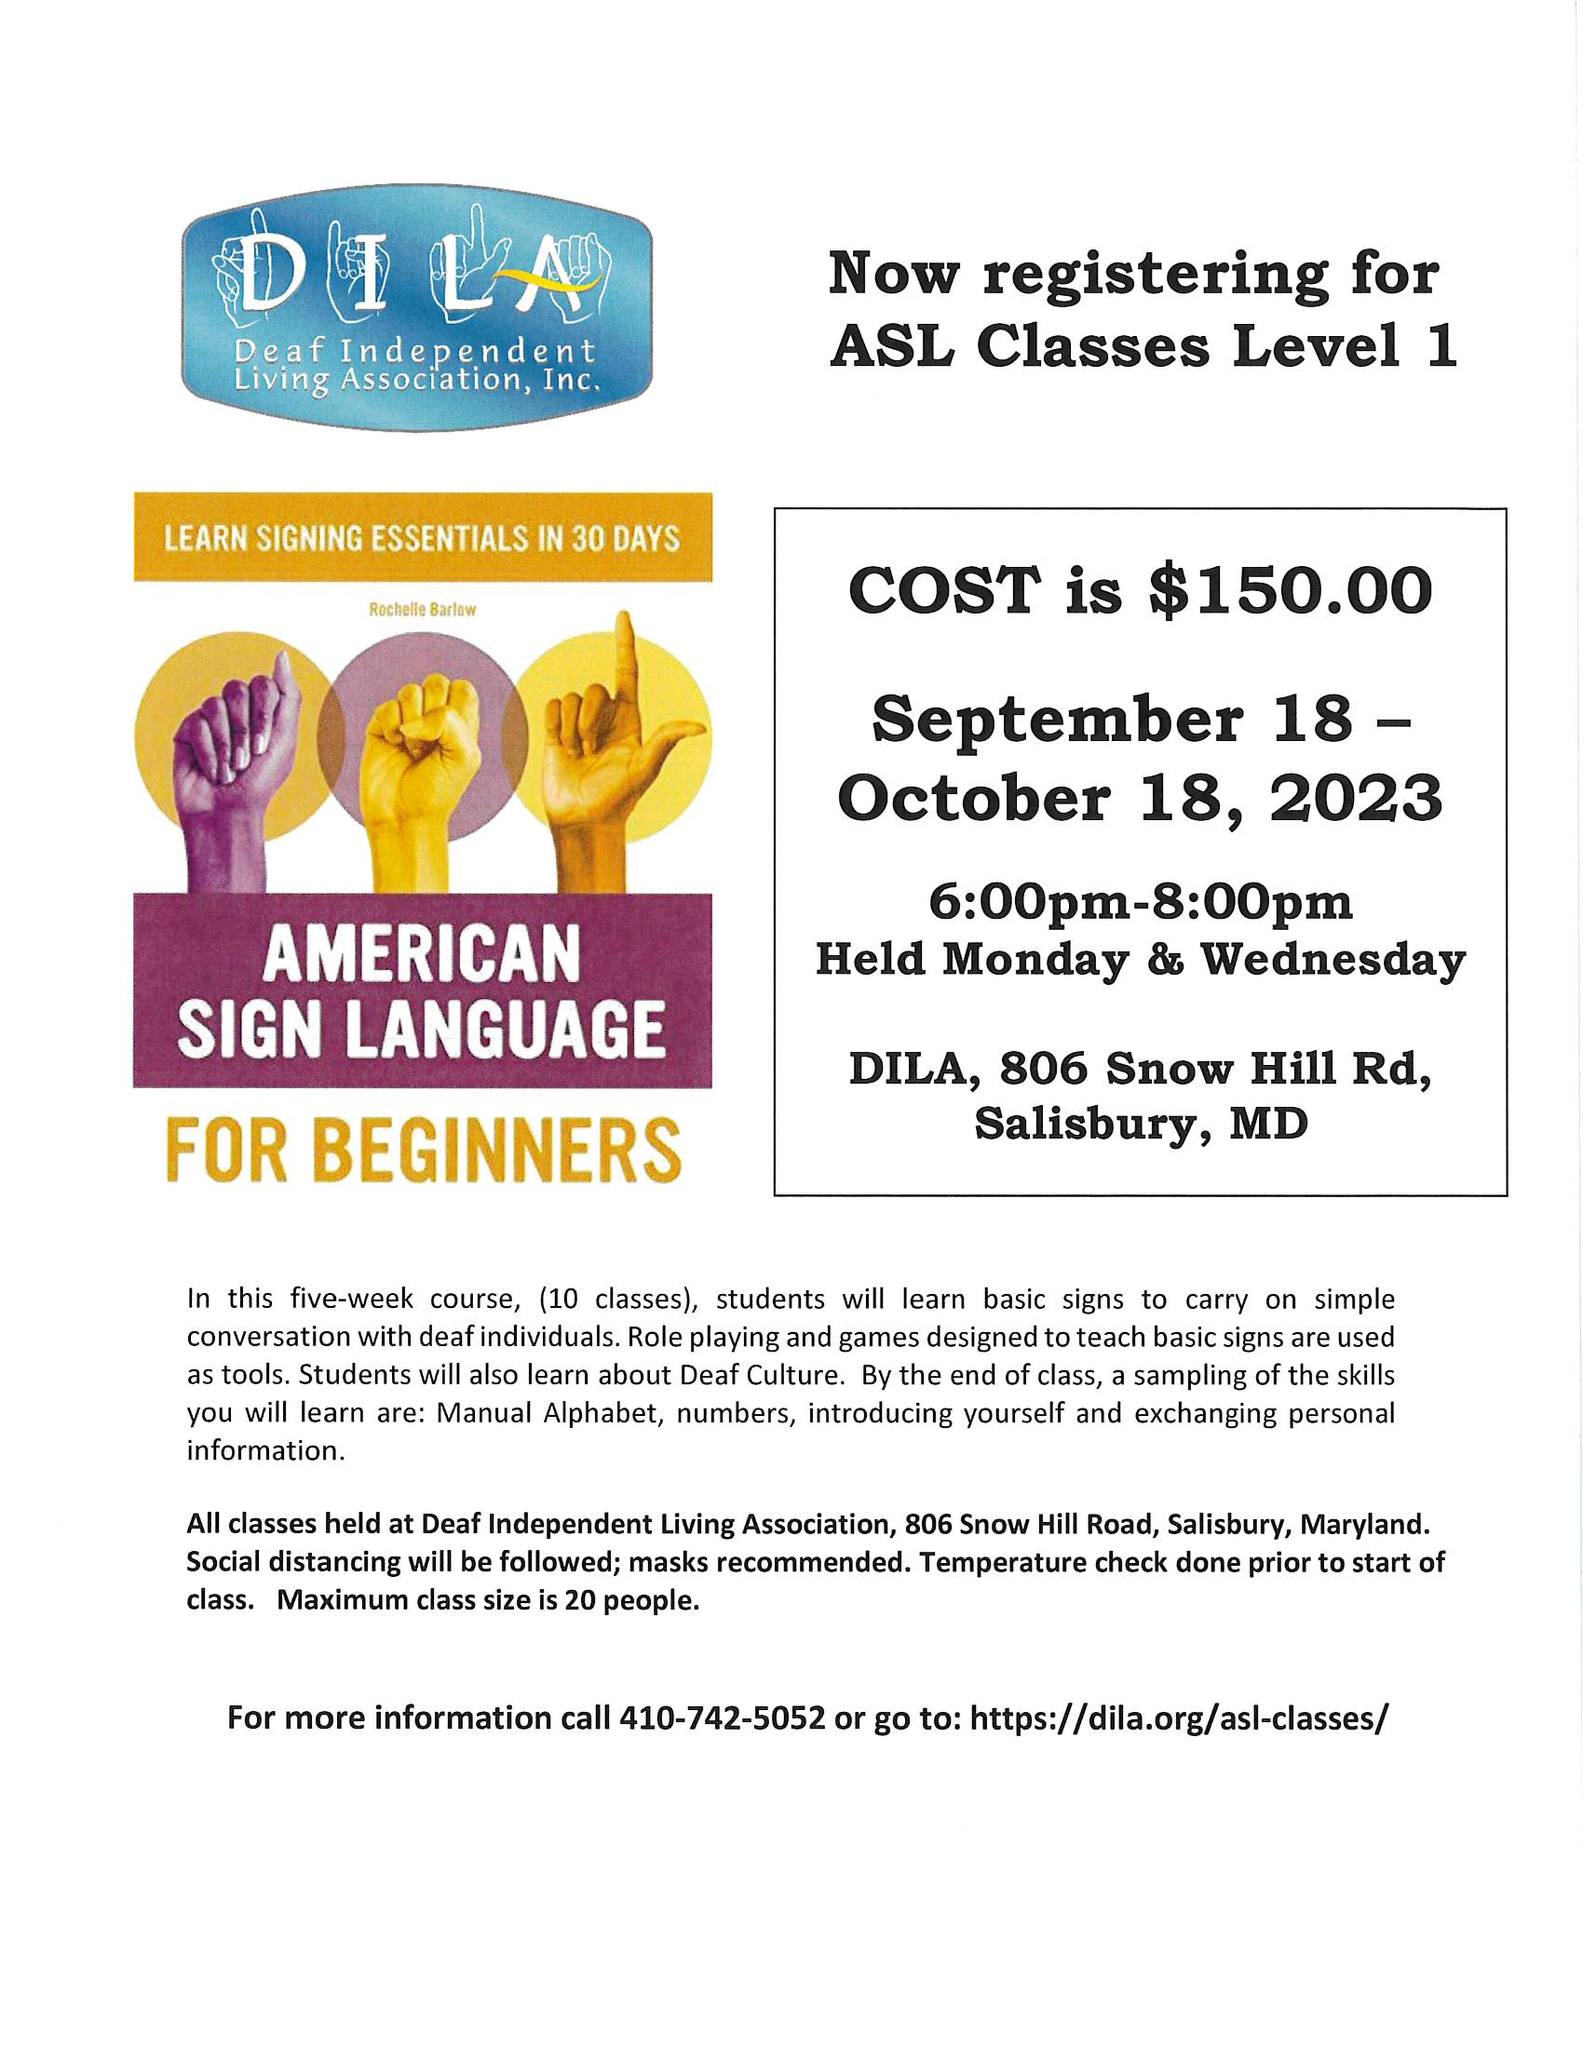 ASL Level 1 classes, Sept 18-Oct 18, 2023. Cost - $150. Mon and Wed, 6p-8p in Salisbury, MD. More info, call 410-742-5052 or see link below.